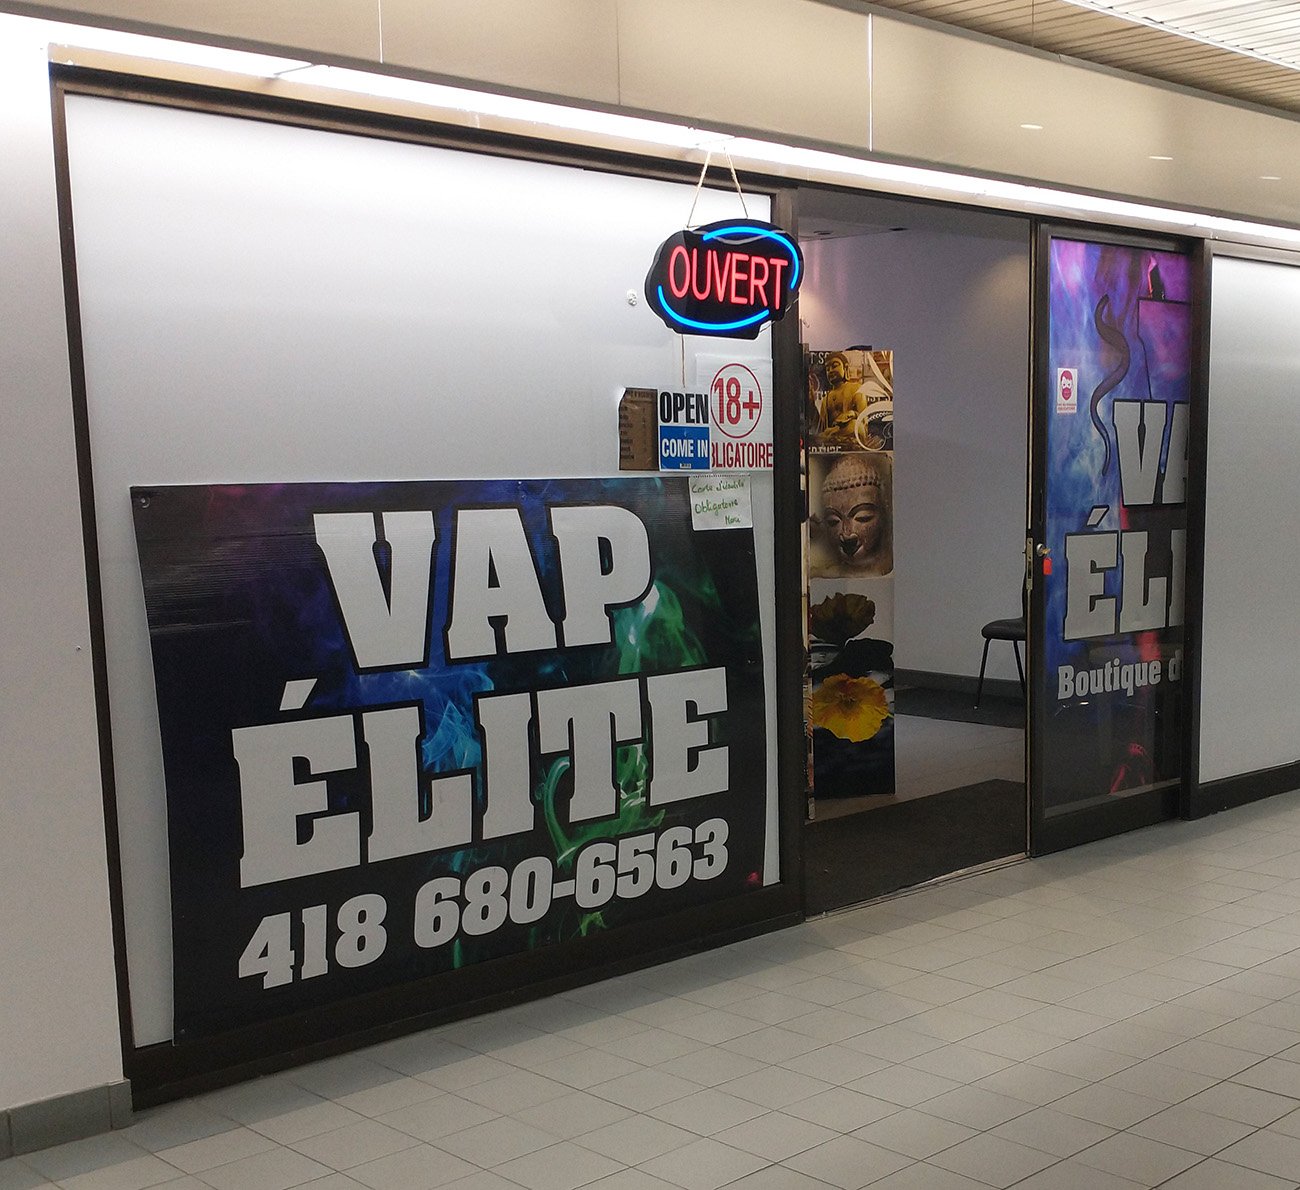 So many vape shops everywhere now, all seemingly catering to 14 year olds.